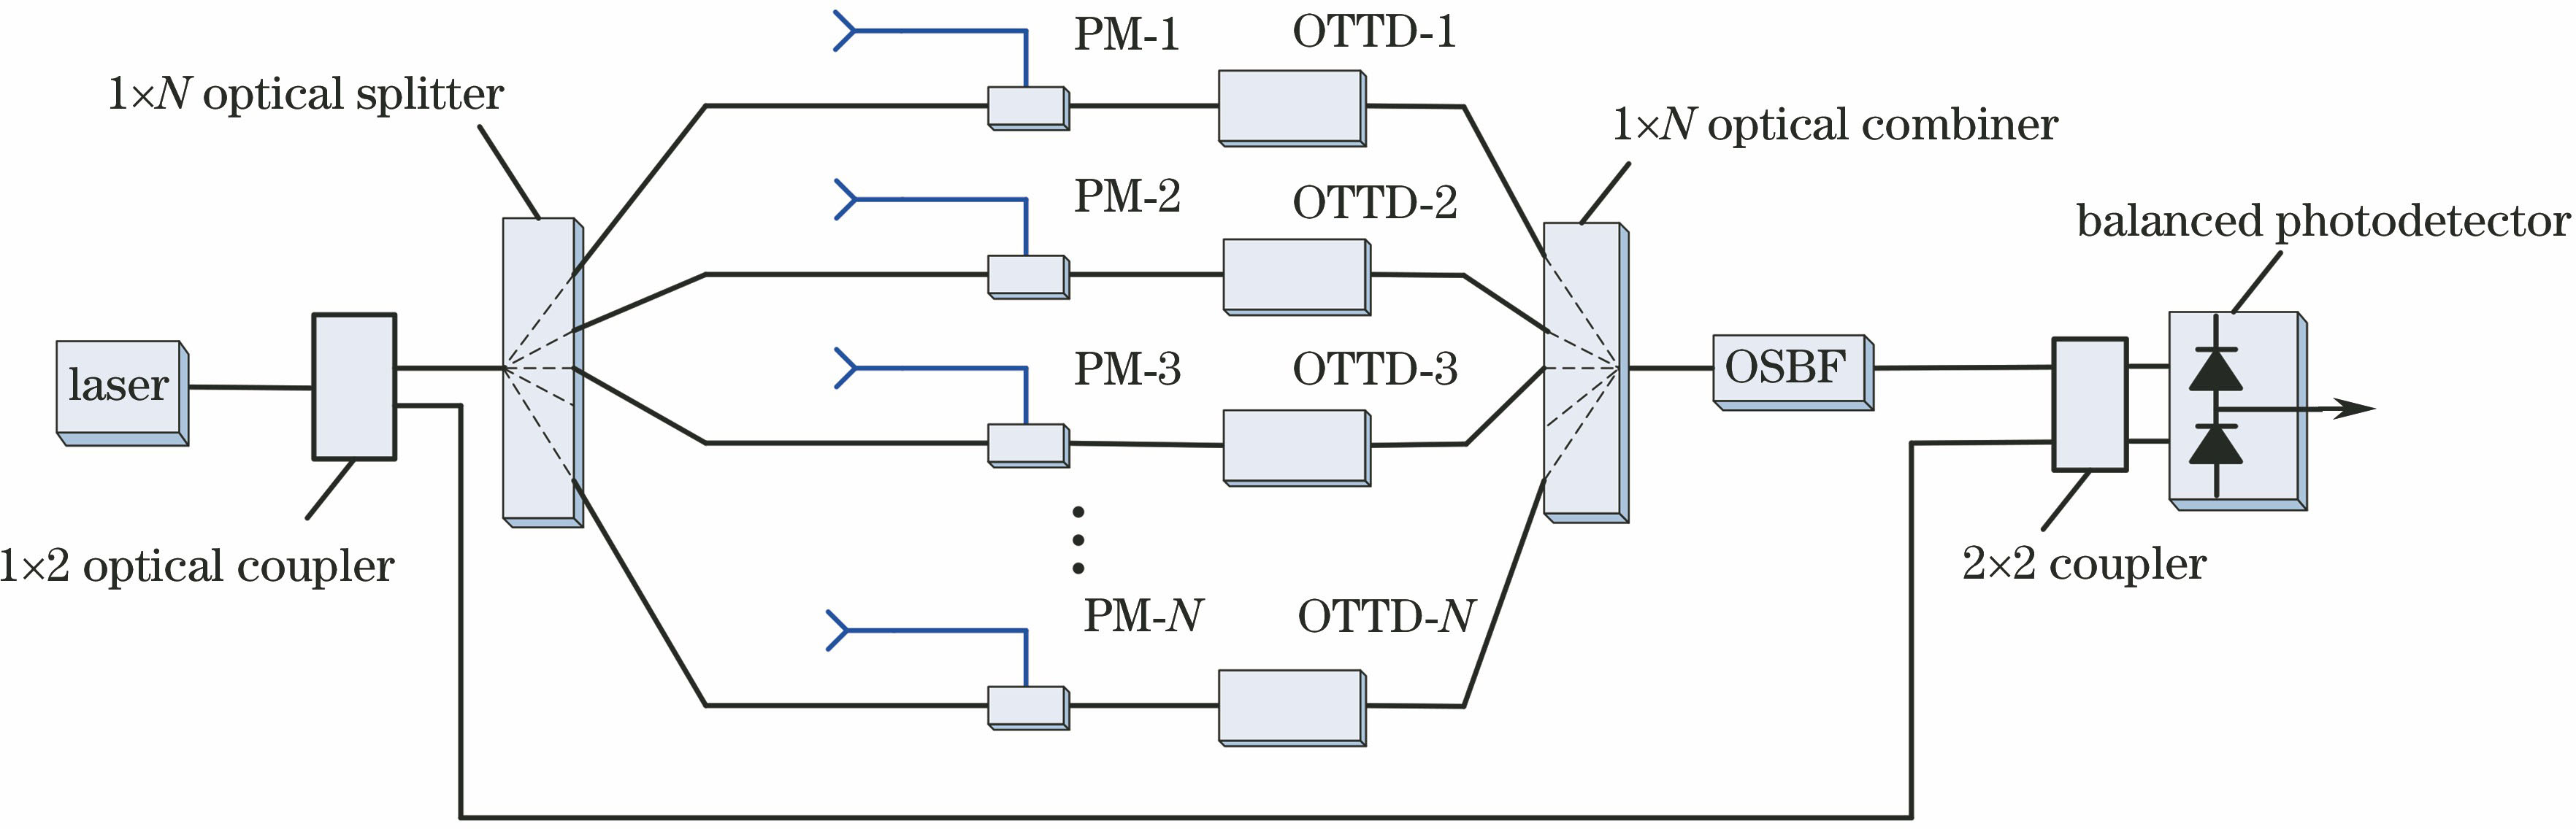 Structural diagram of optical time delay network